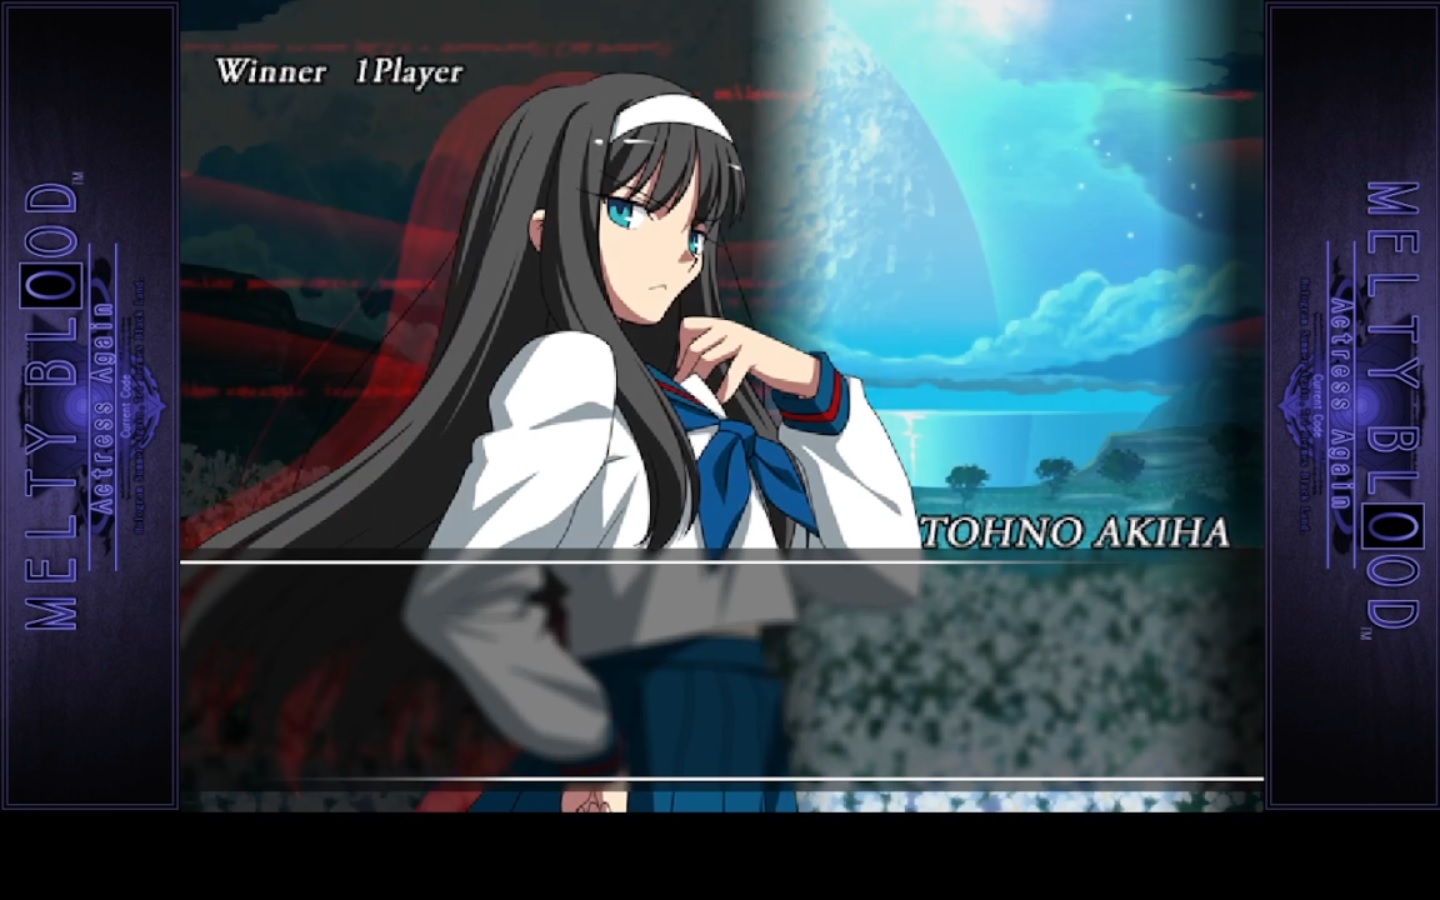 MELTY BLOOD Actress Again Current Code.Tohno Akiha vs Red Arcueid [遠野秋葉VS暴走アルクェイド]